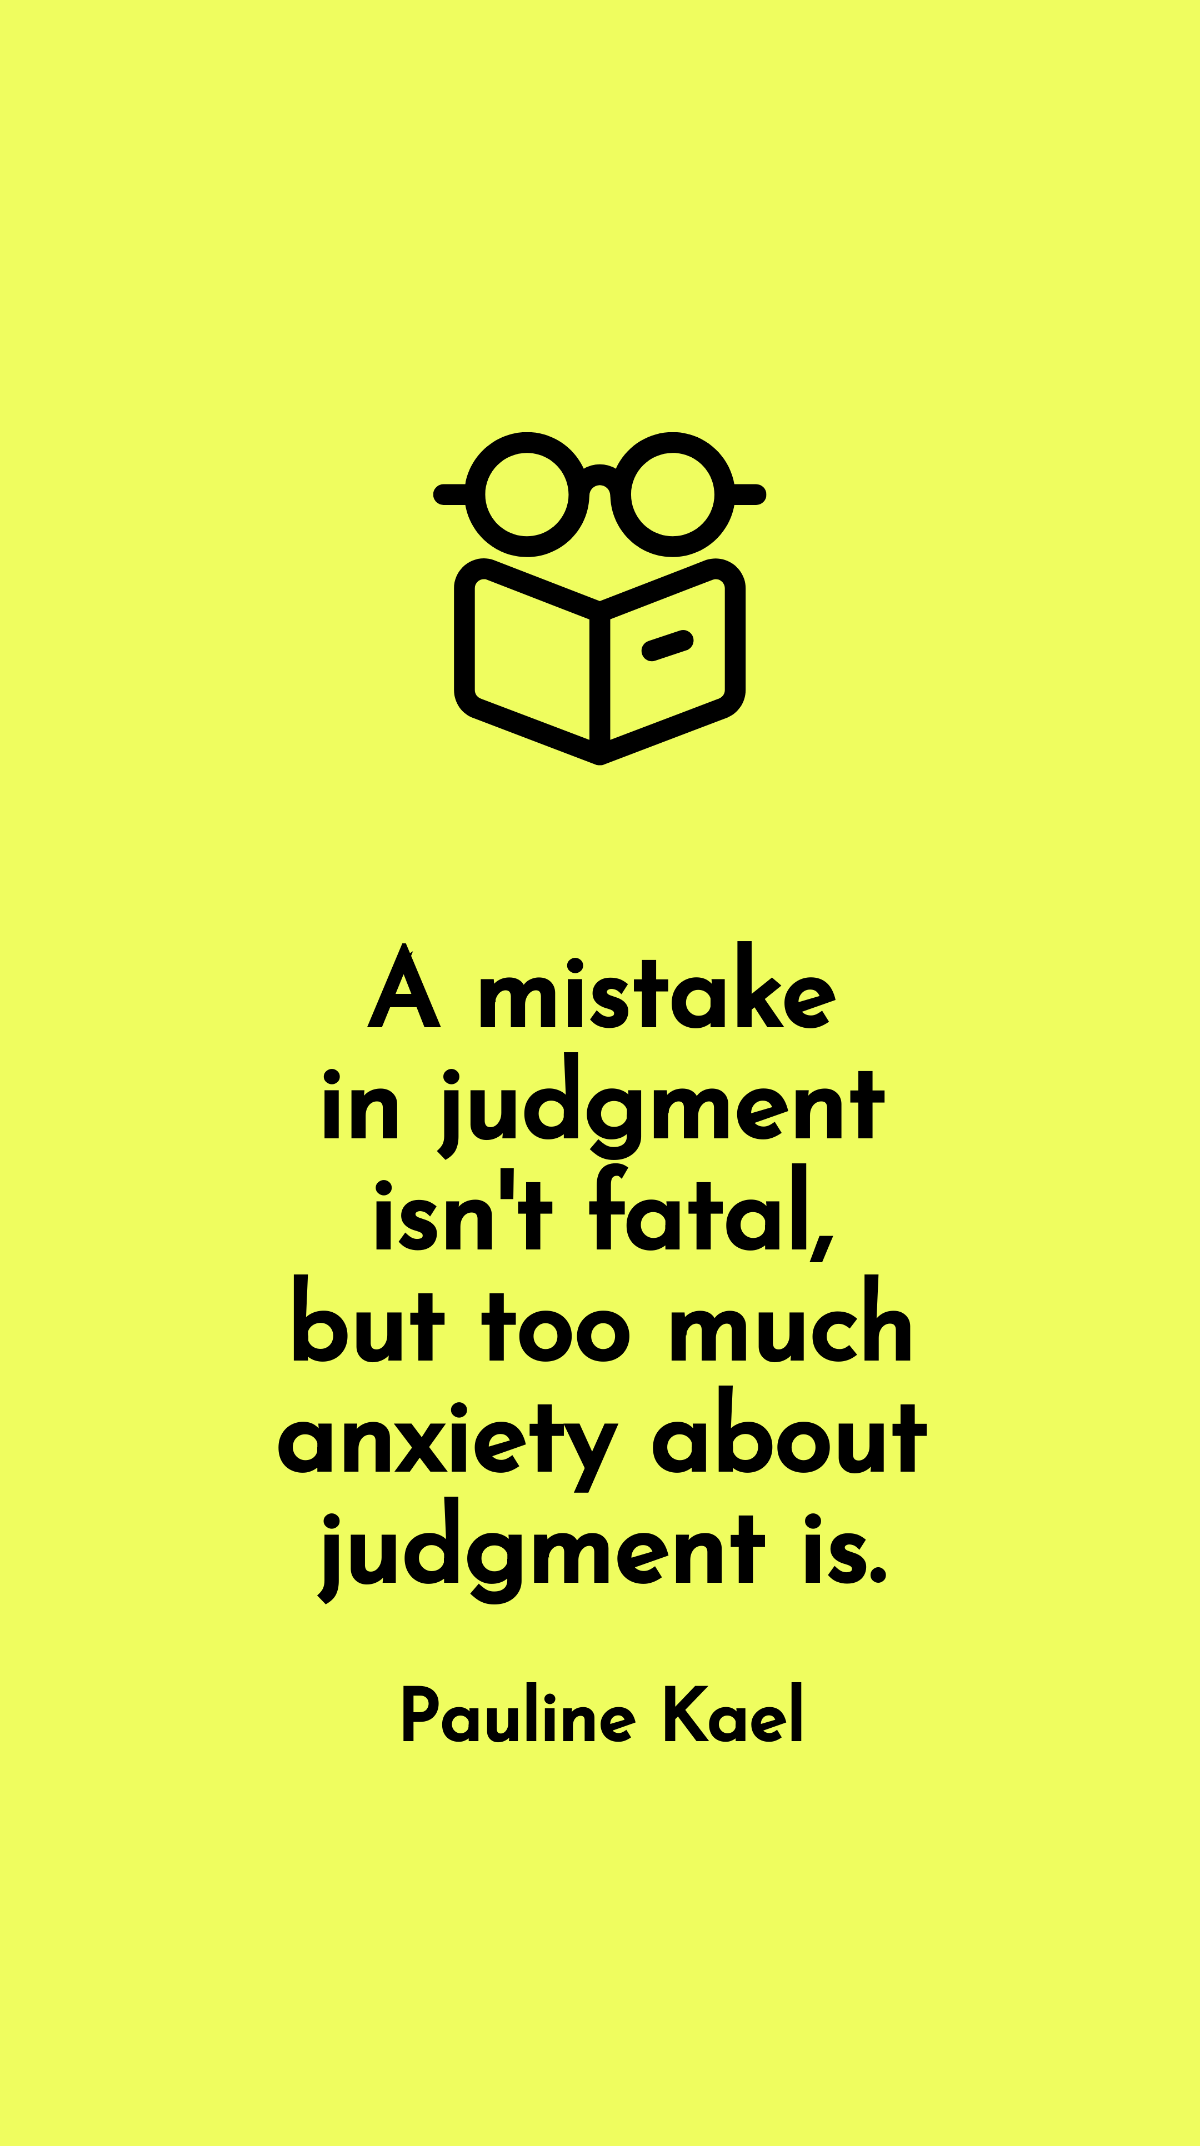 Pauline Kael - A mistake in judgment isn't fatal, but too much anxiety about judgment is.